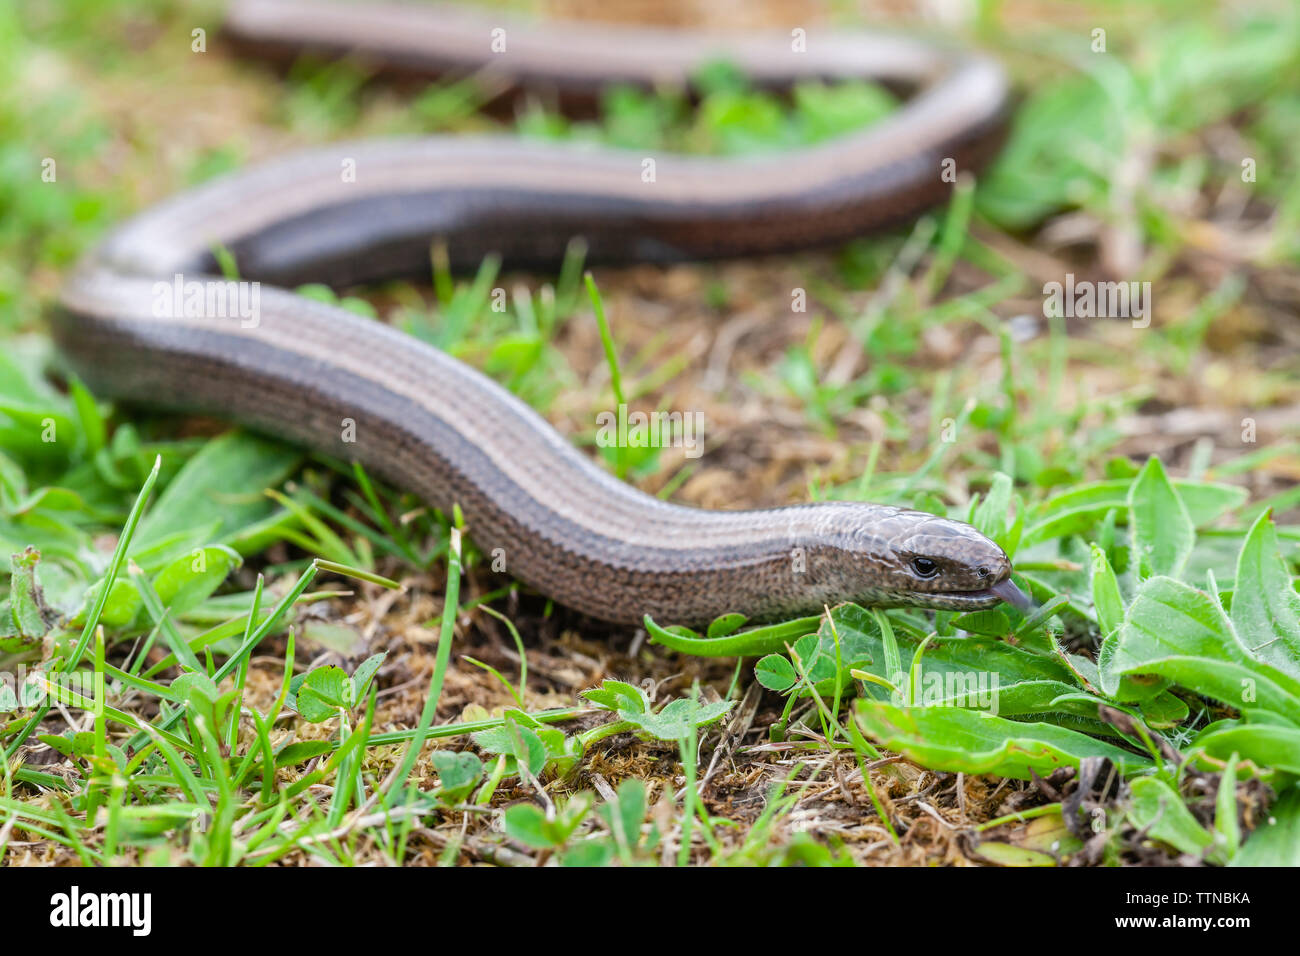 Slow-worm or Slowworm, Co. Clare, Ireland. The slowworm is not native to Ireland but is thought to have been introduced from Britain in the 1970's. Stock Photo